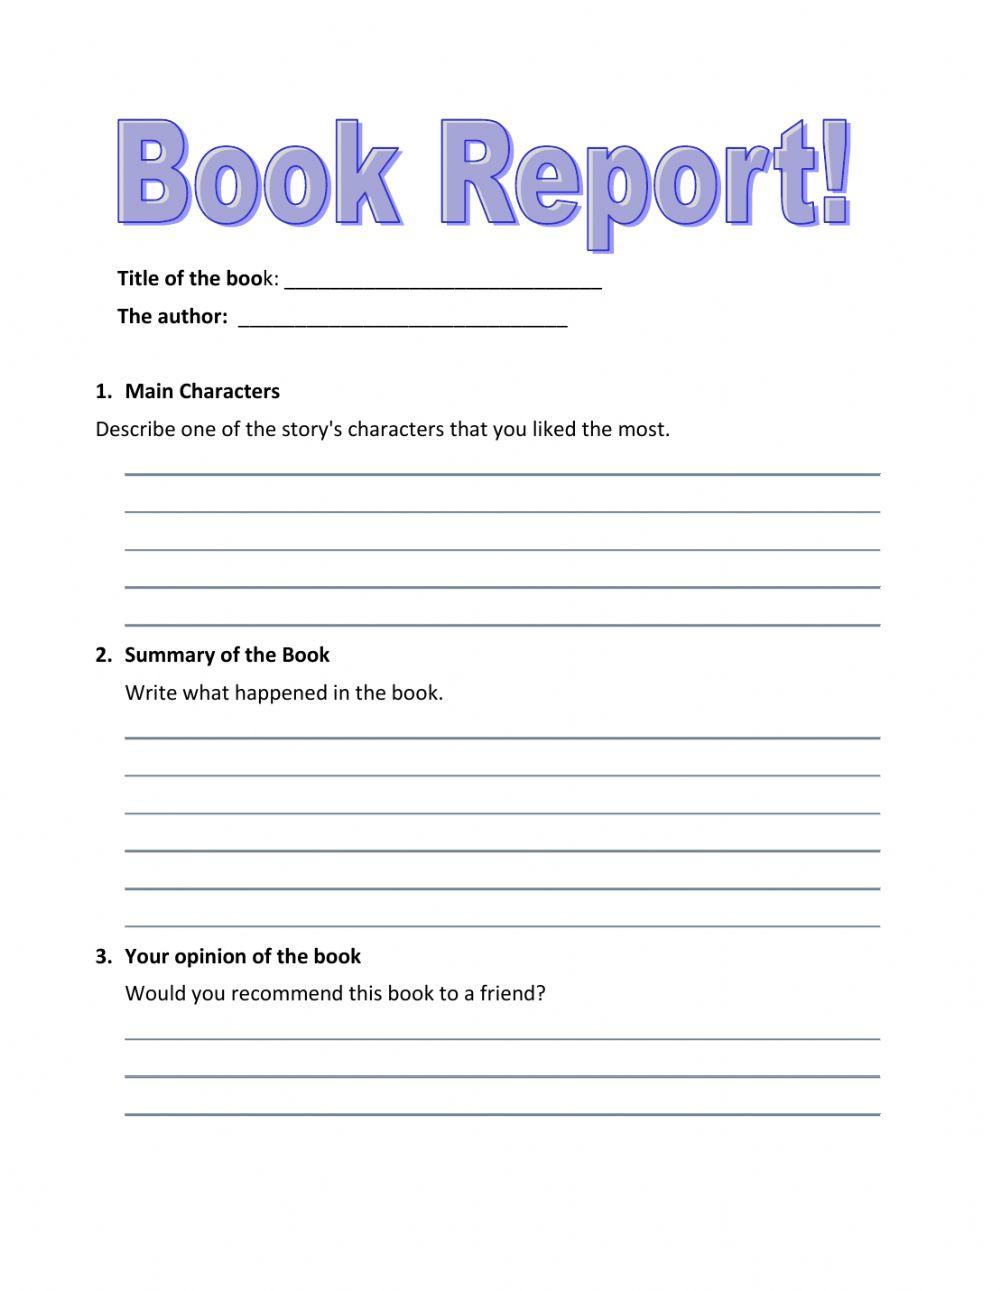 Book Report interactive exercise | Live Worksheets